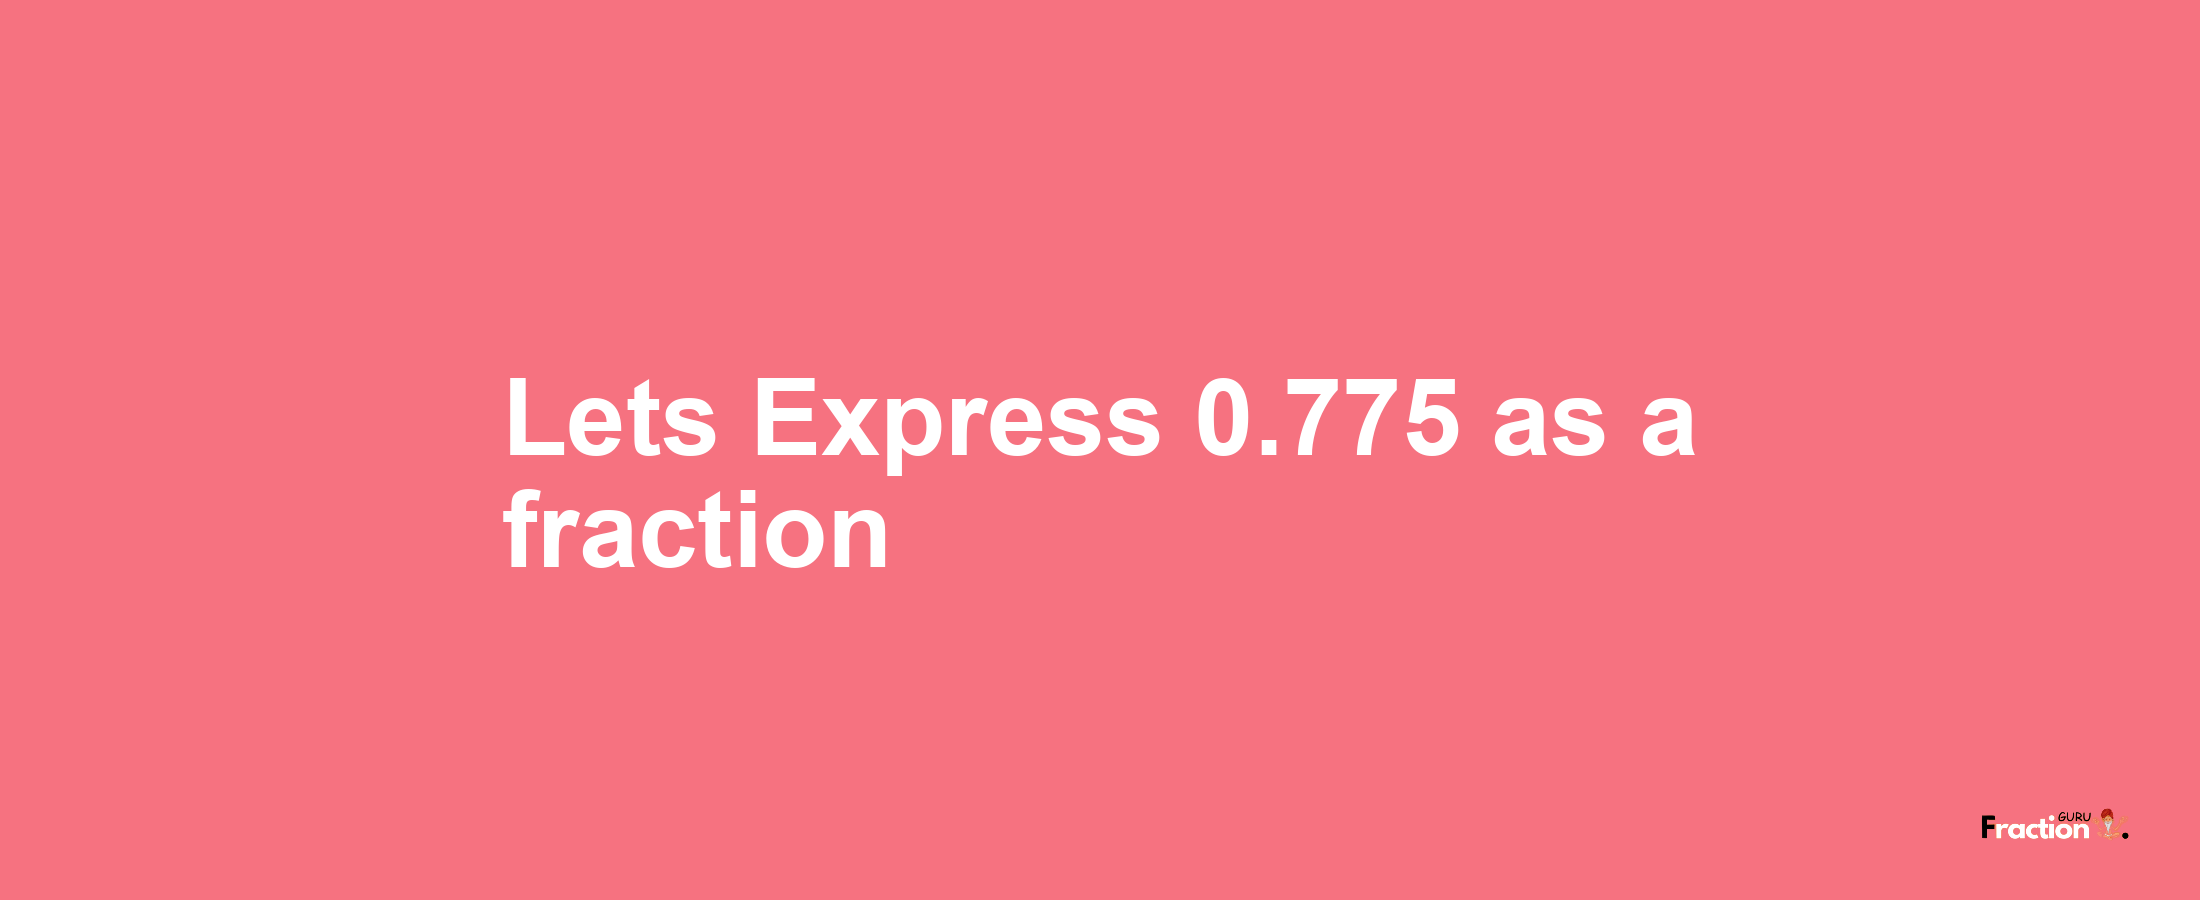 Lets Express 0.775 as afraction